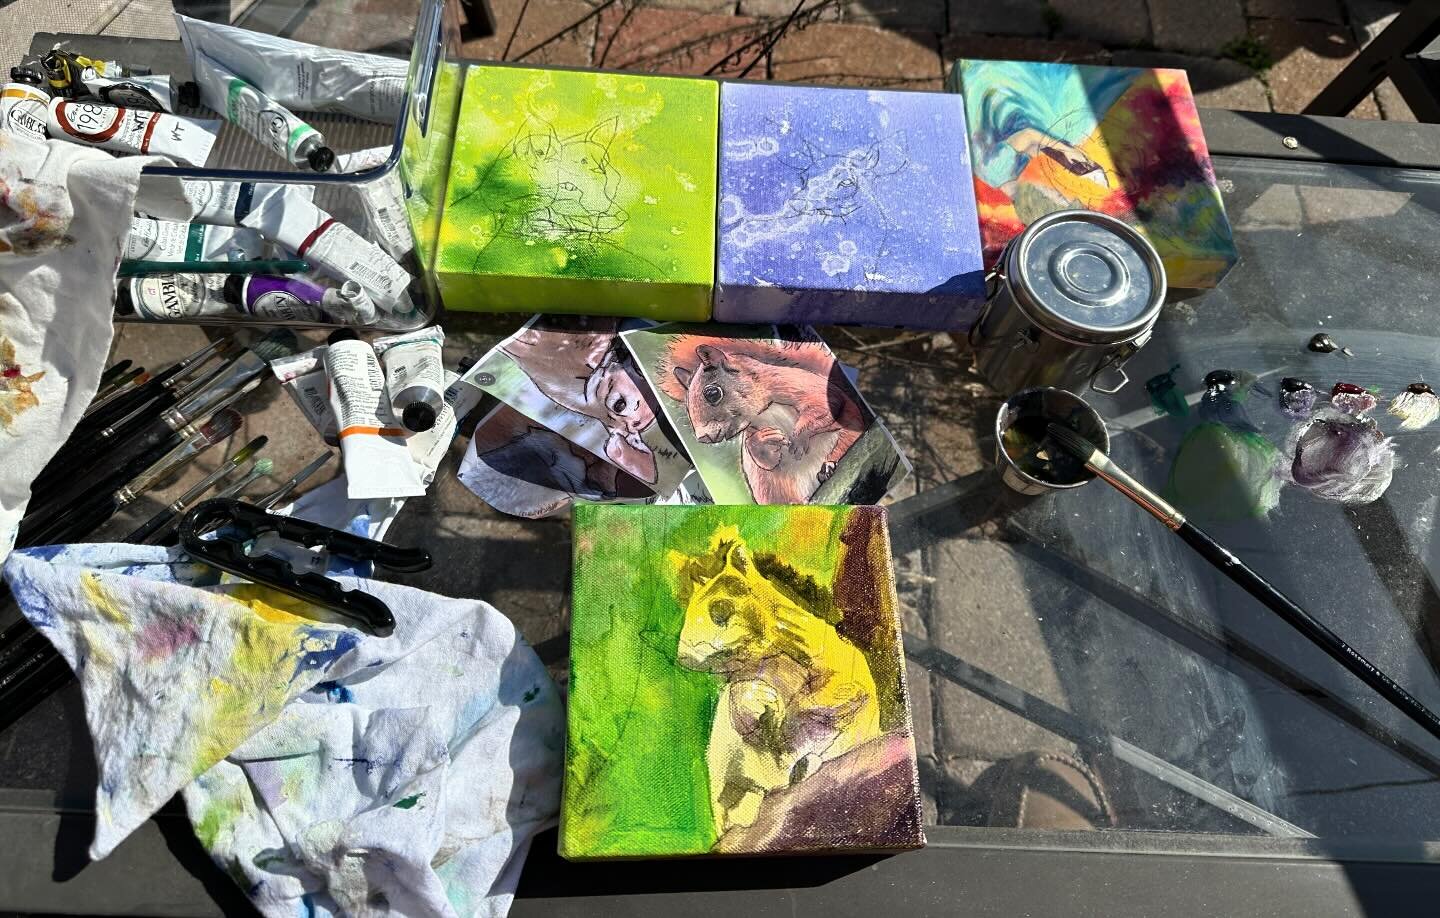 It&rsquo;s a beautiful day for painting on the patio! Feel Free to come and join me! #painting #stlouisartistsguild #stlliving #stllife #lifeinstlouis #patio #outdoorfun #sunisshining #artstl #artstagram #artstlouis #stlhomes #stldesigner #artcurator